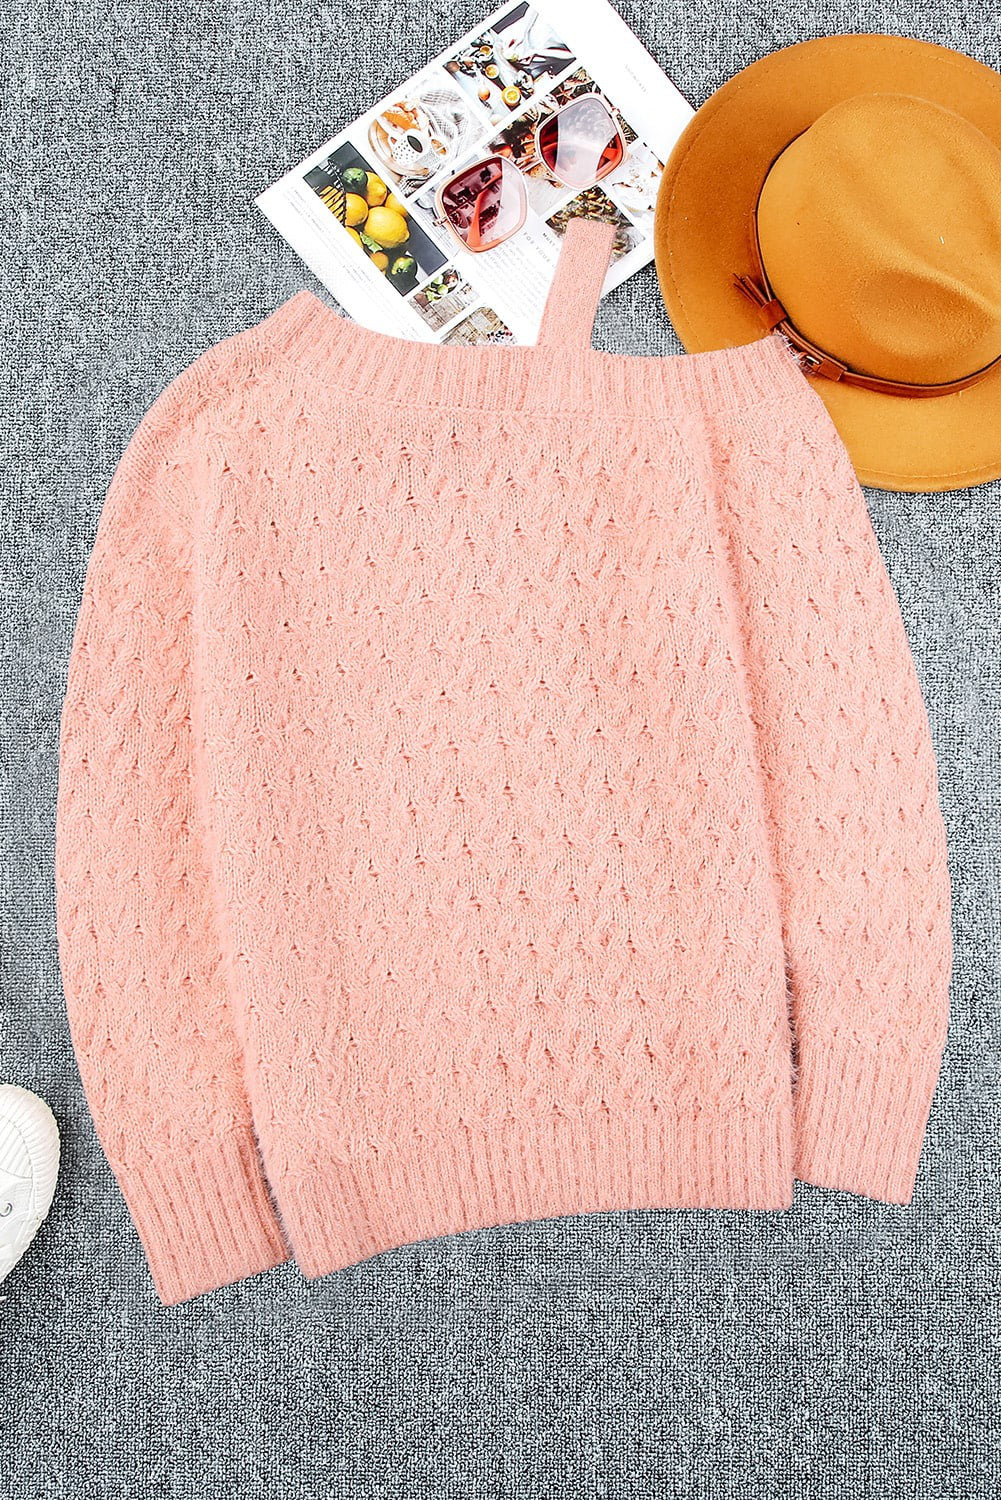 Sweater, One-sided Shoulder Cutout, Pink, Regular and Plus